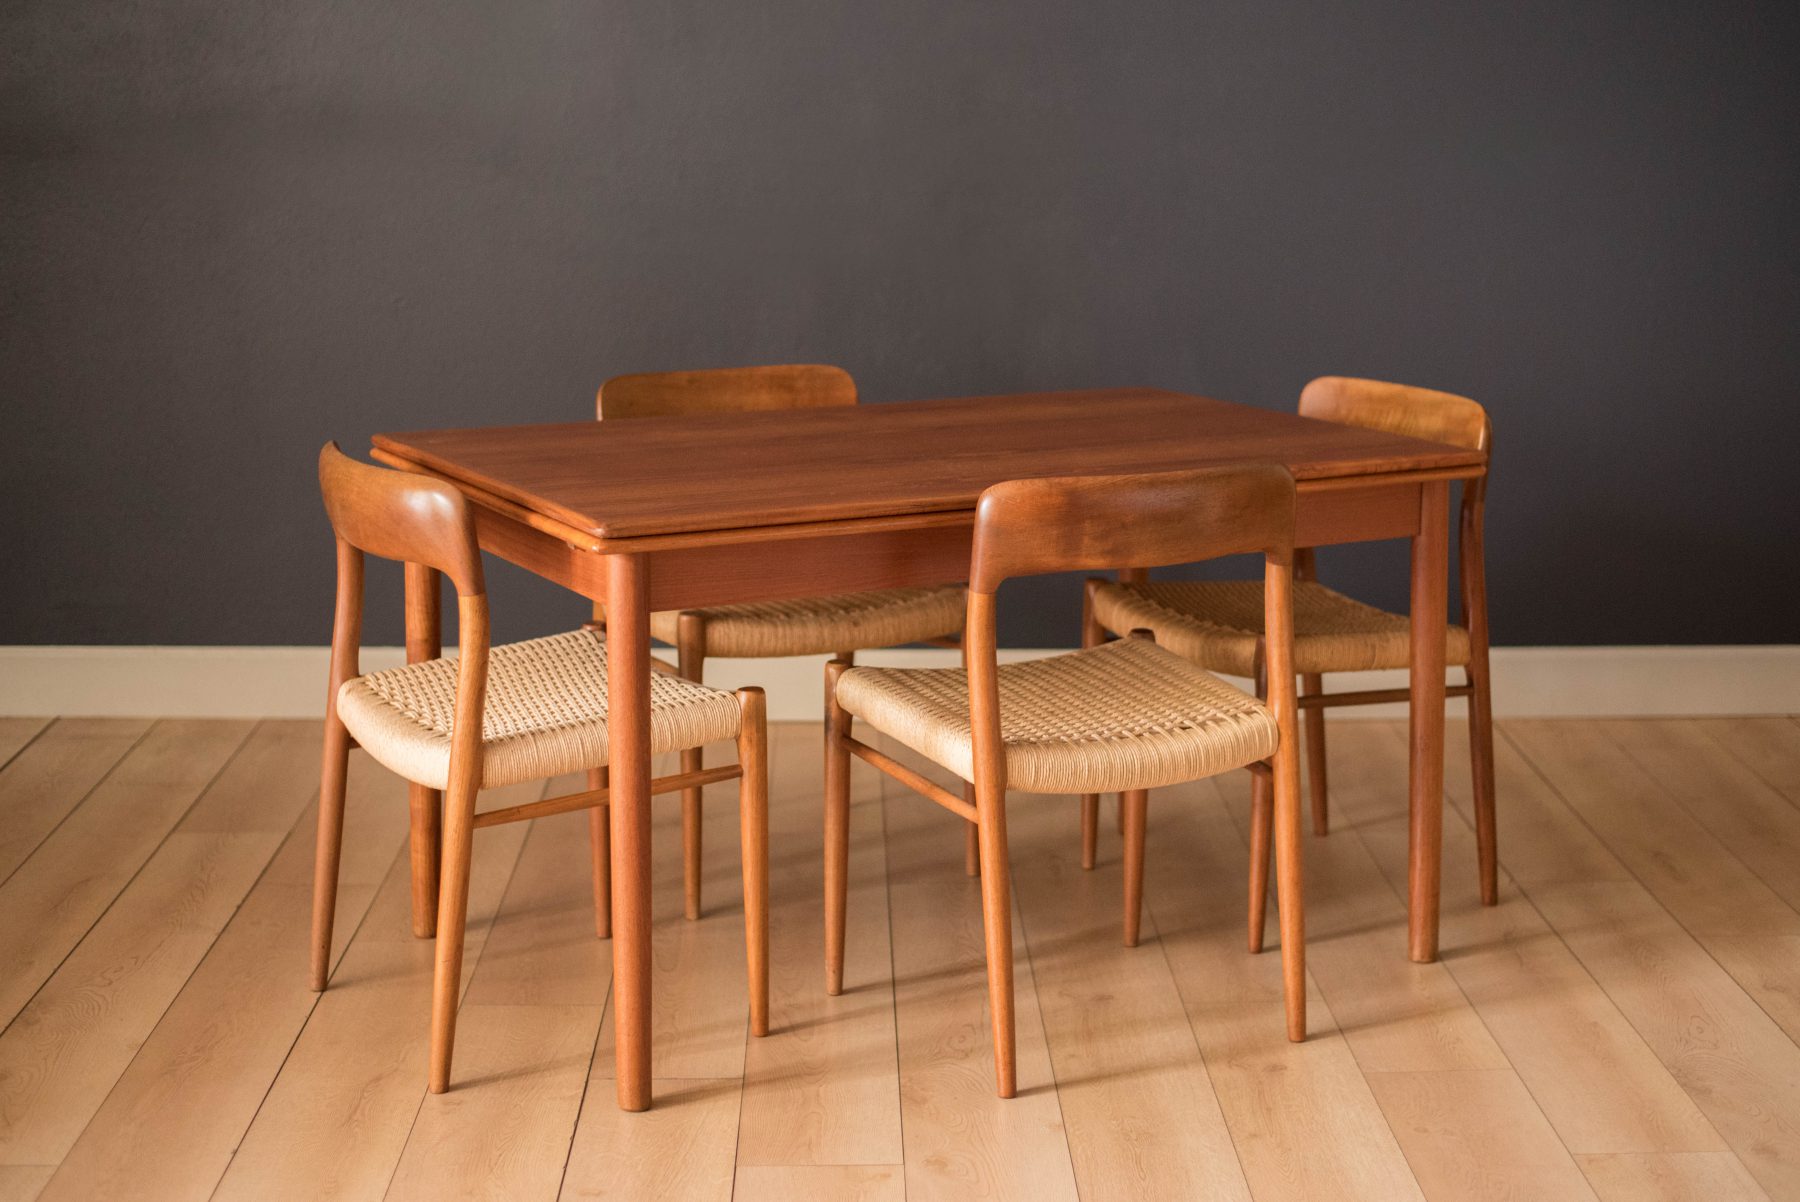 Teak Dining Table With Storage: Practical And Stylish